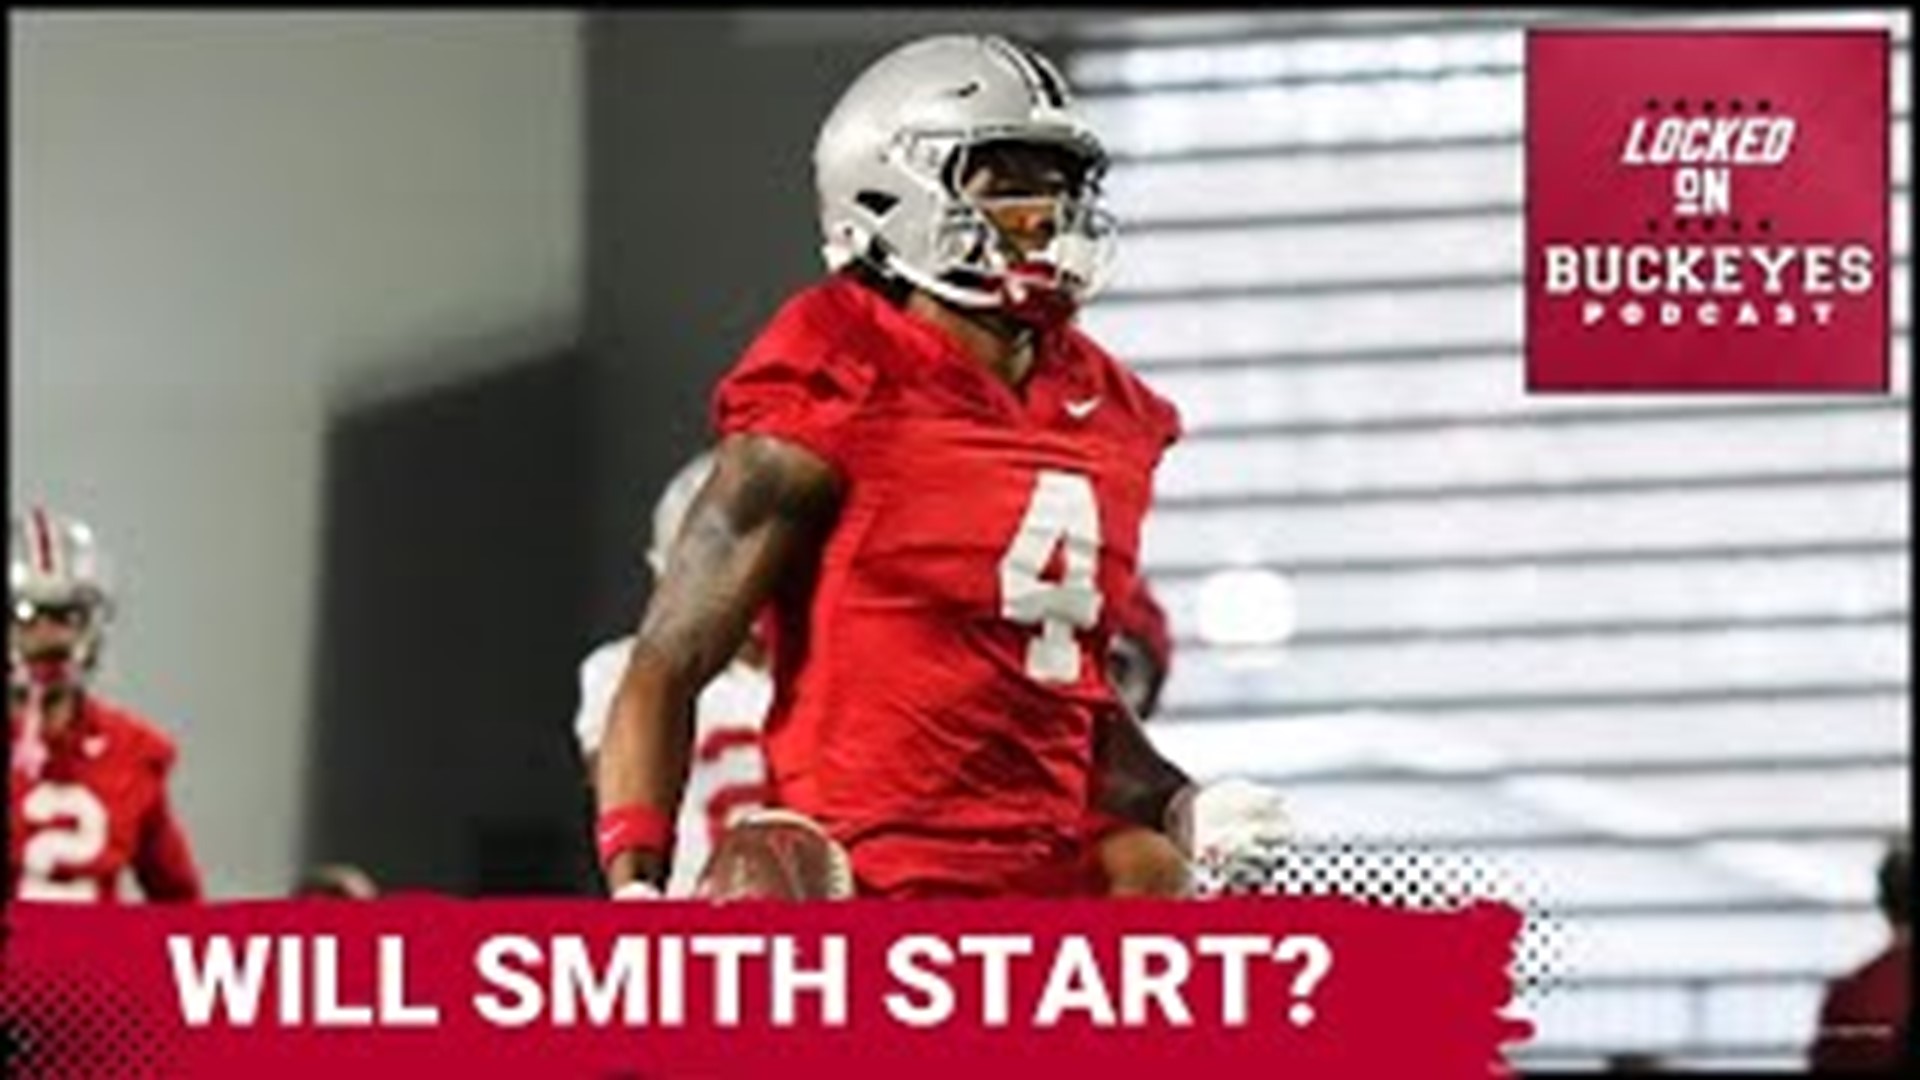 Why Ohio State, Ryan Day Need to Play Jeremiah Smith | Ohio State Buckeyes Podcast